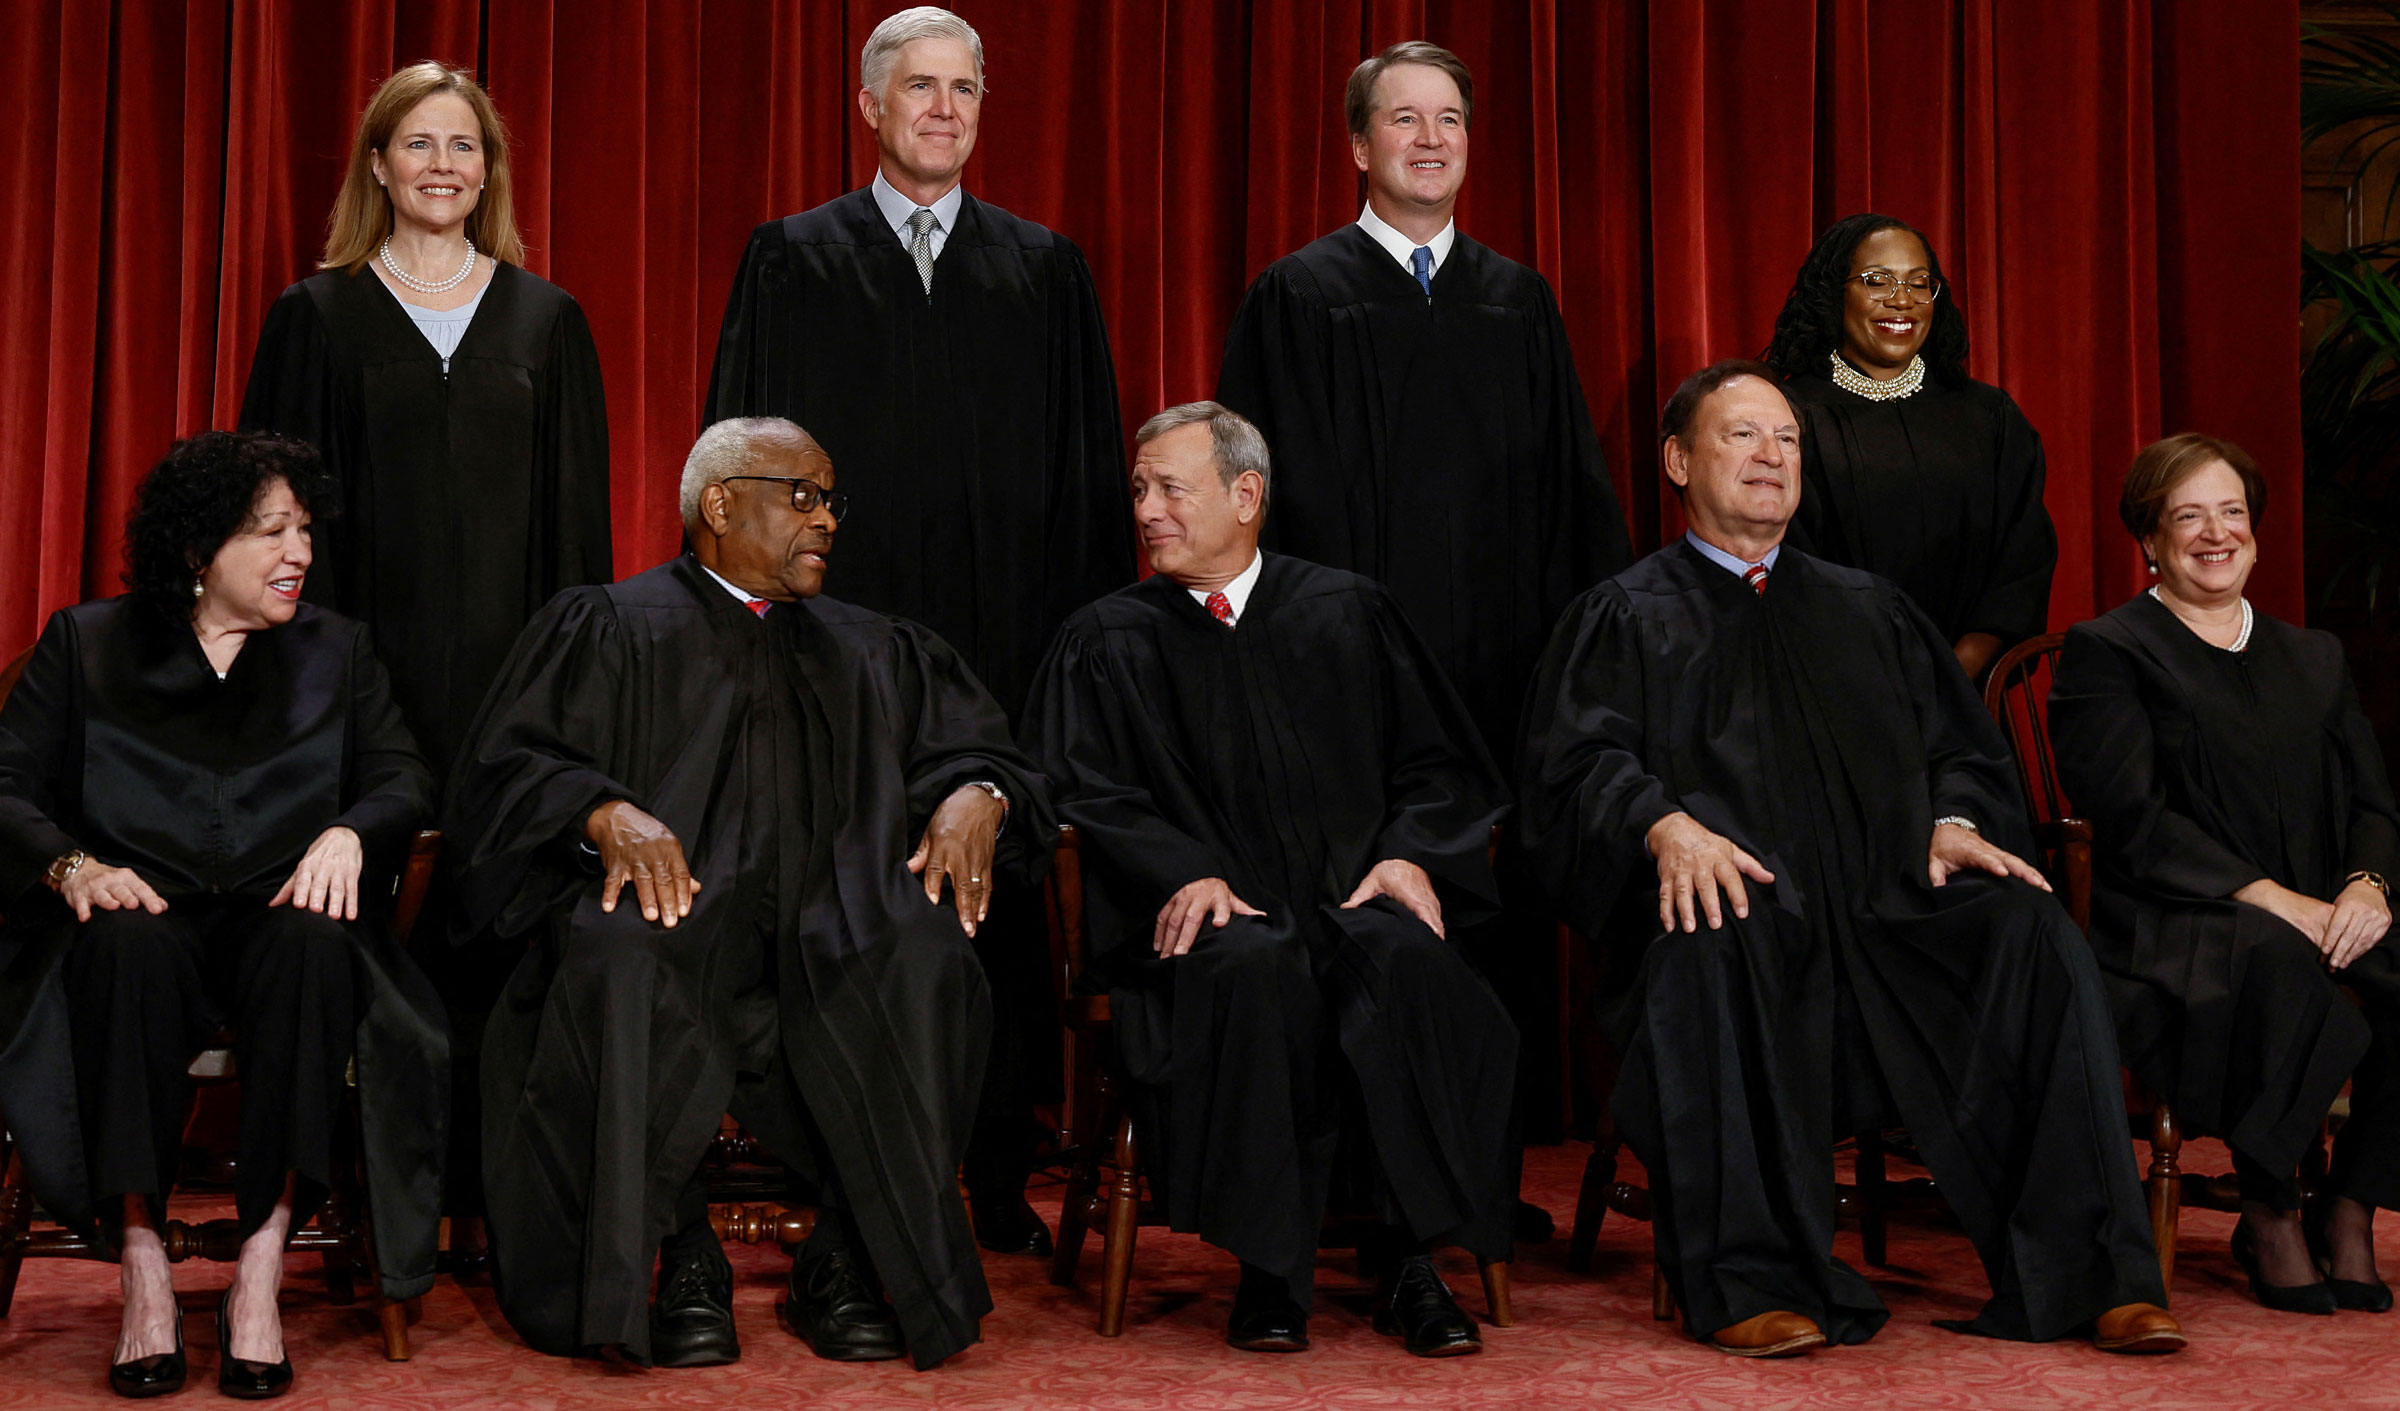 The US Supreme Court justices pose for a group portrait in October. In the front row, from left, are Sonia Sotomayor, Clarence Thomas, Chief Justice John Roberts, Samuel Alito and Elena Kagan. Behind them, from left, are Justices Amy Coney Barrett, Neil Gorsuch, Brett Kavanaugh and Ketanji Brown Jackson.